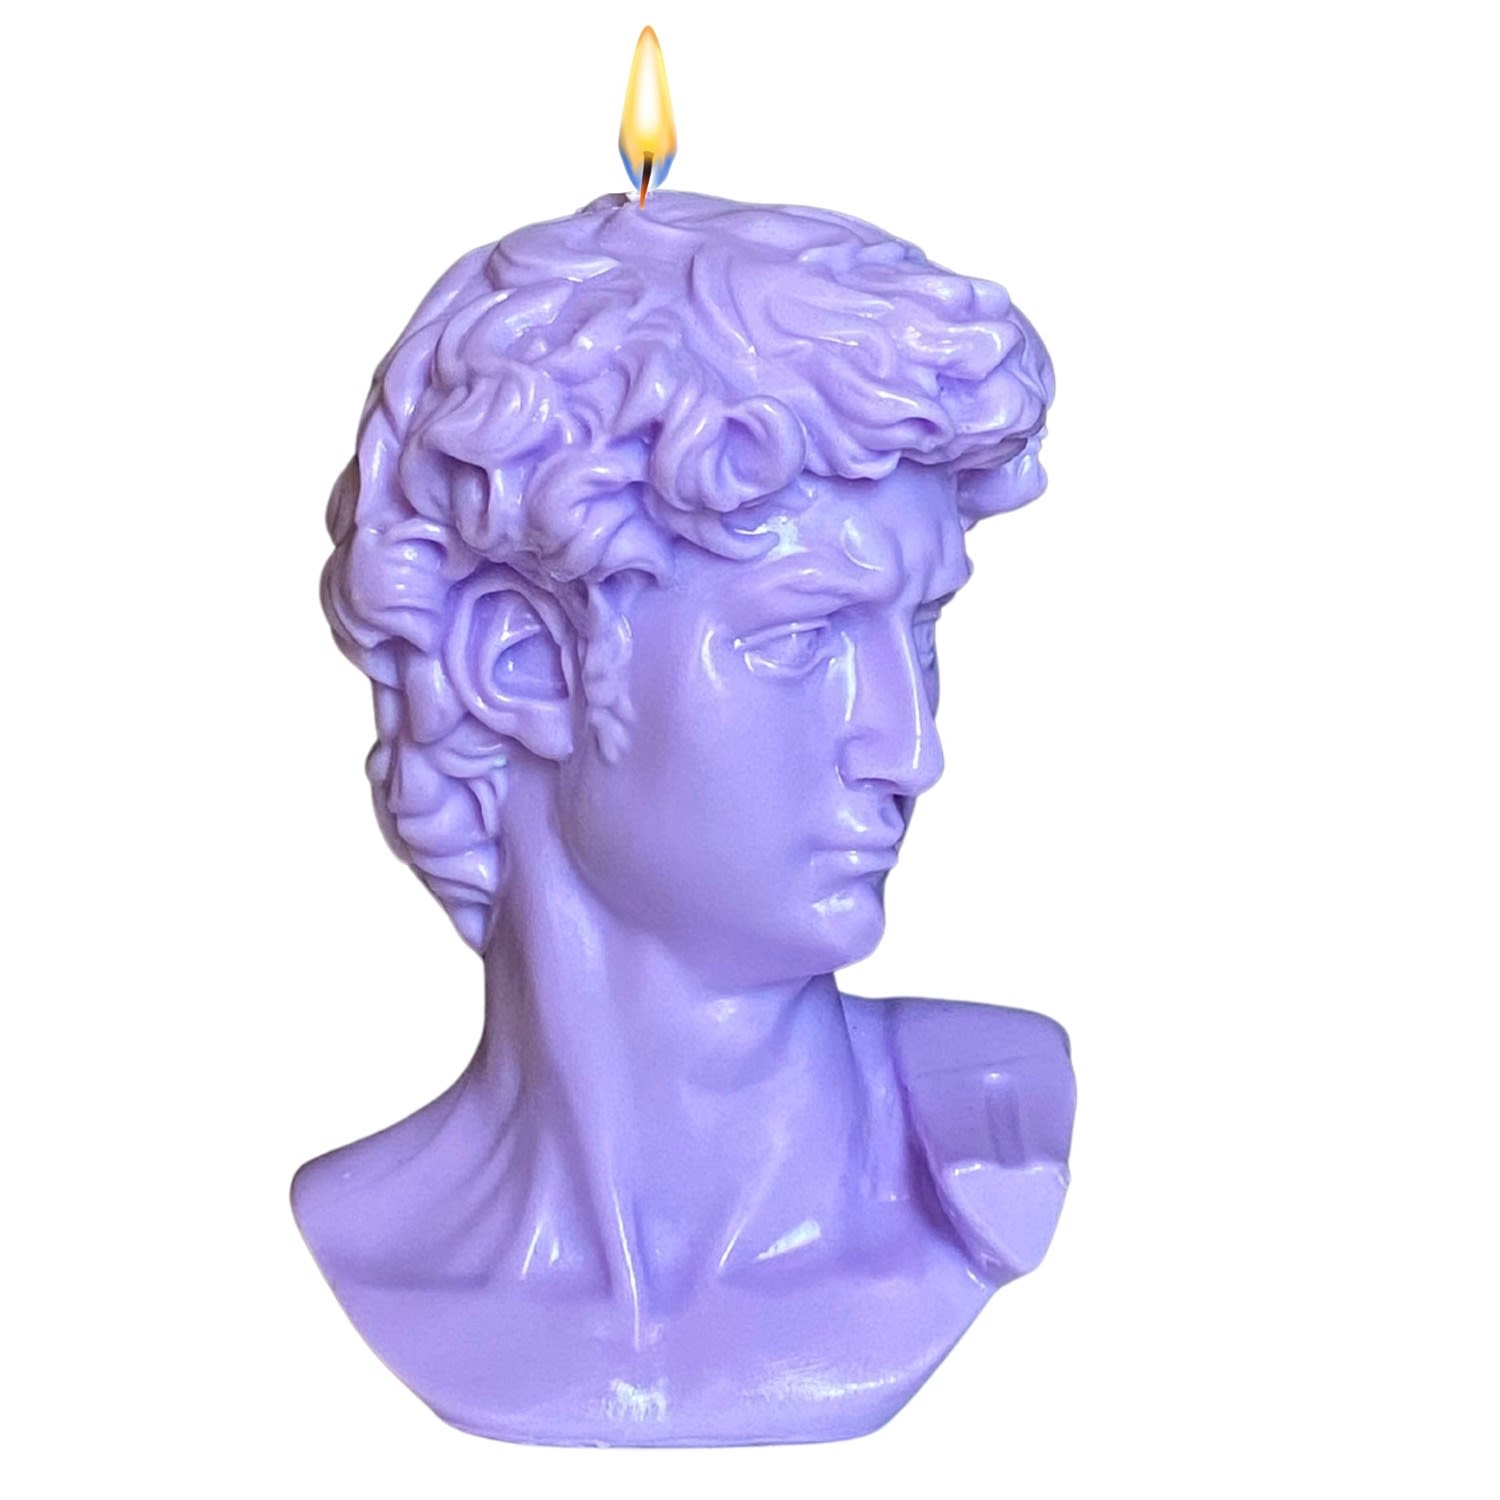 Neos Candlestudio Pink / Purple David Bust Candle - Lilac